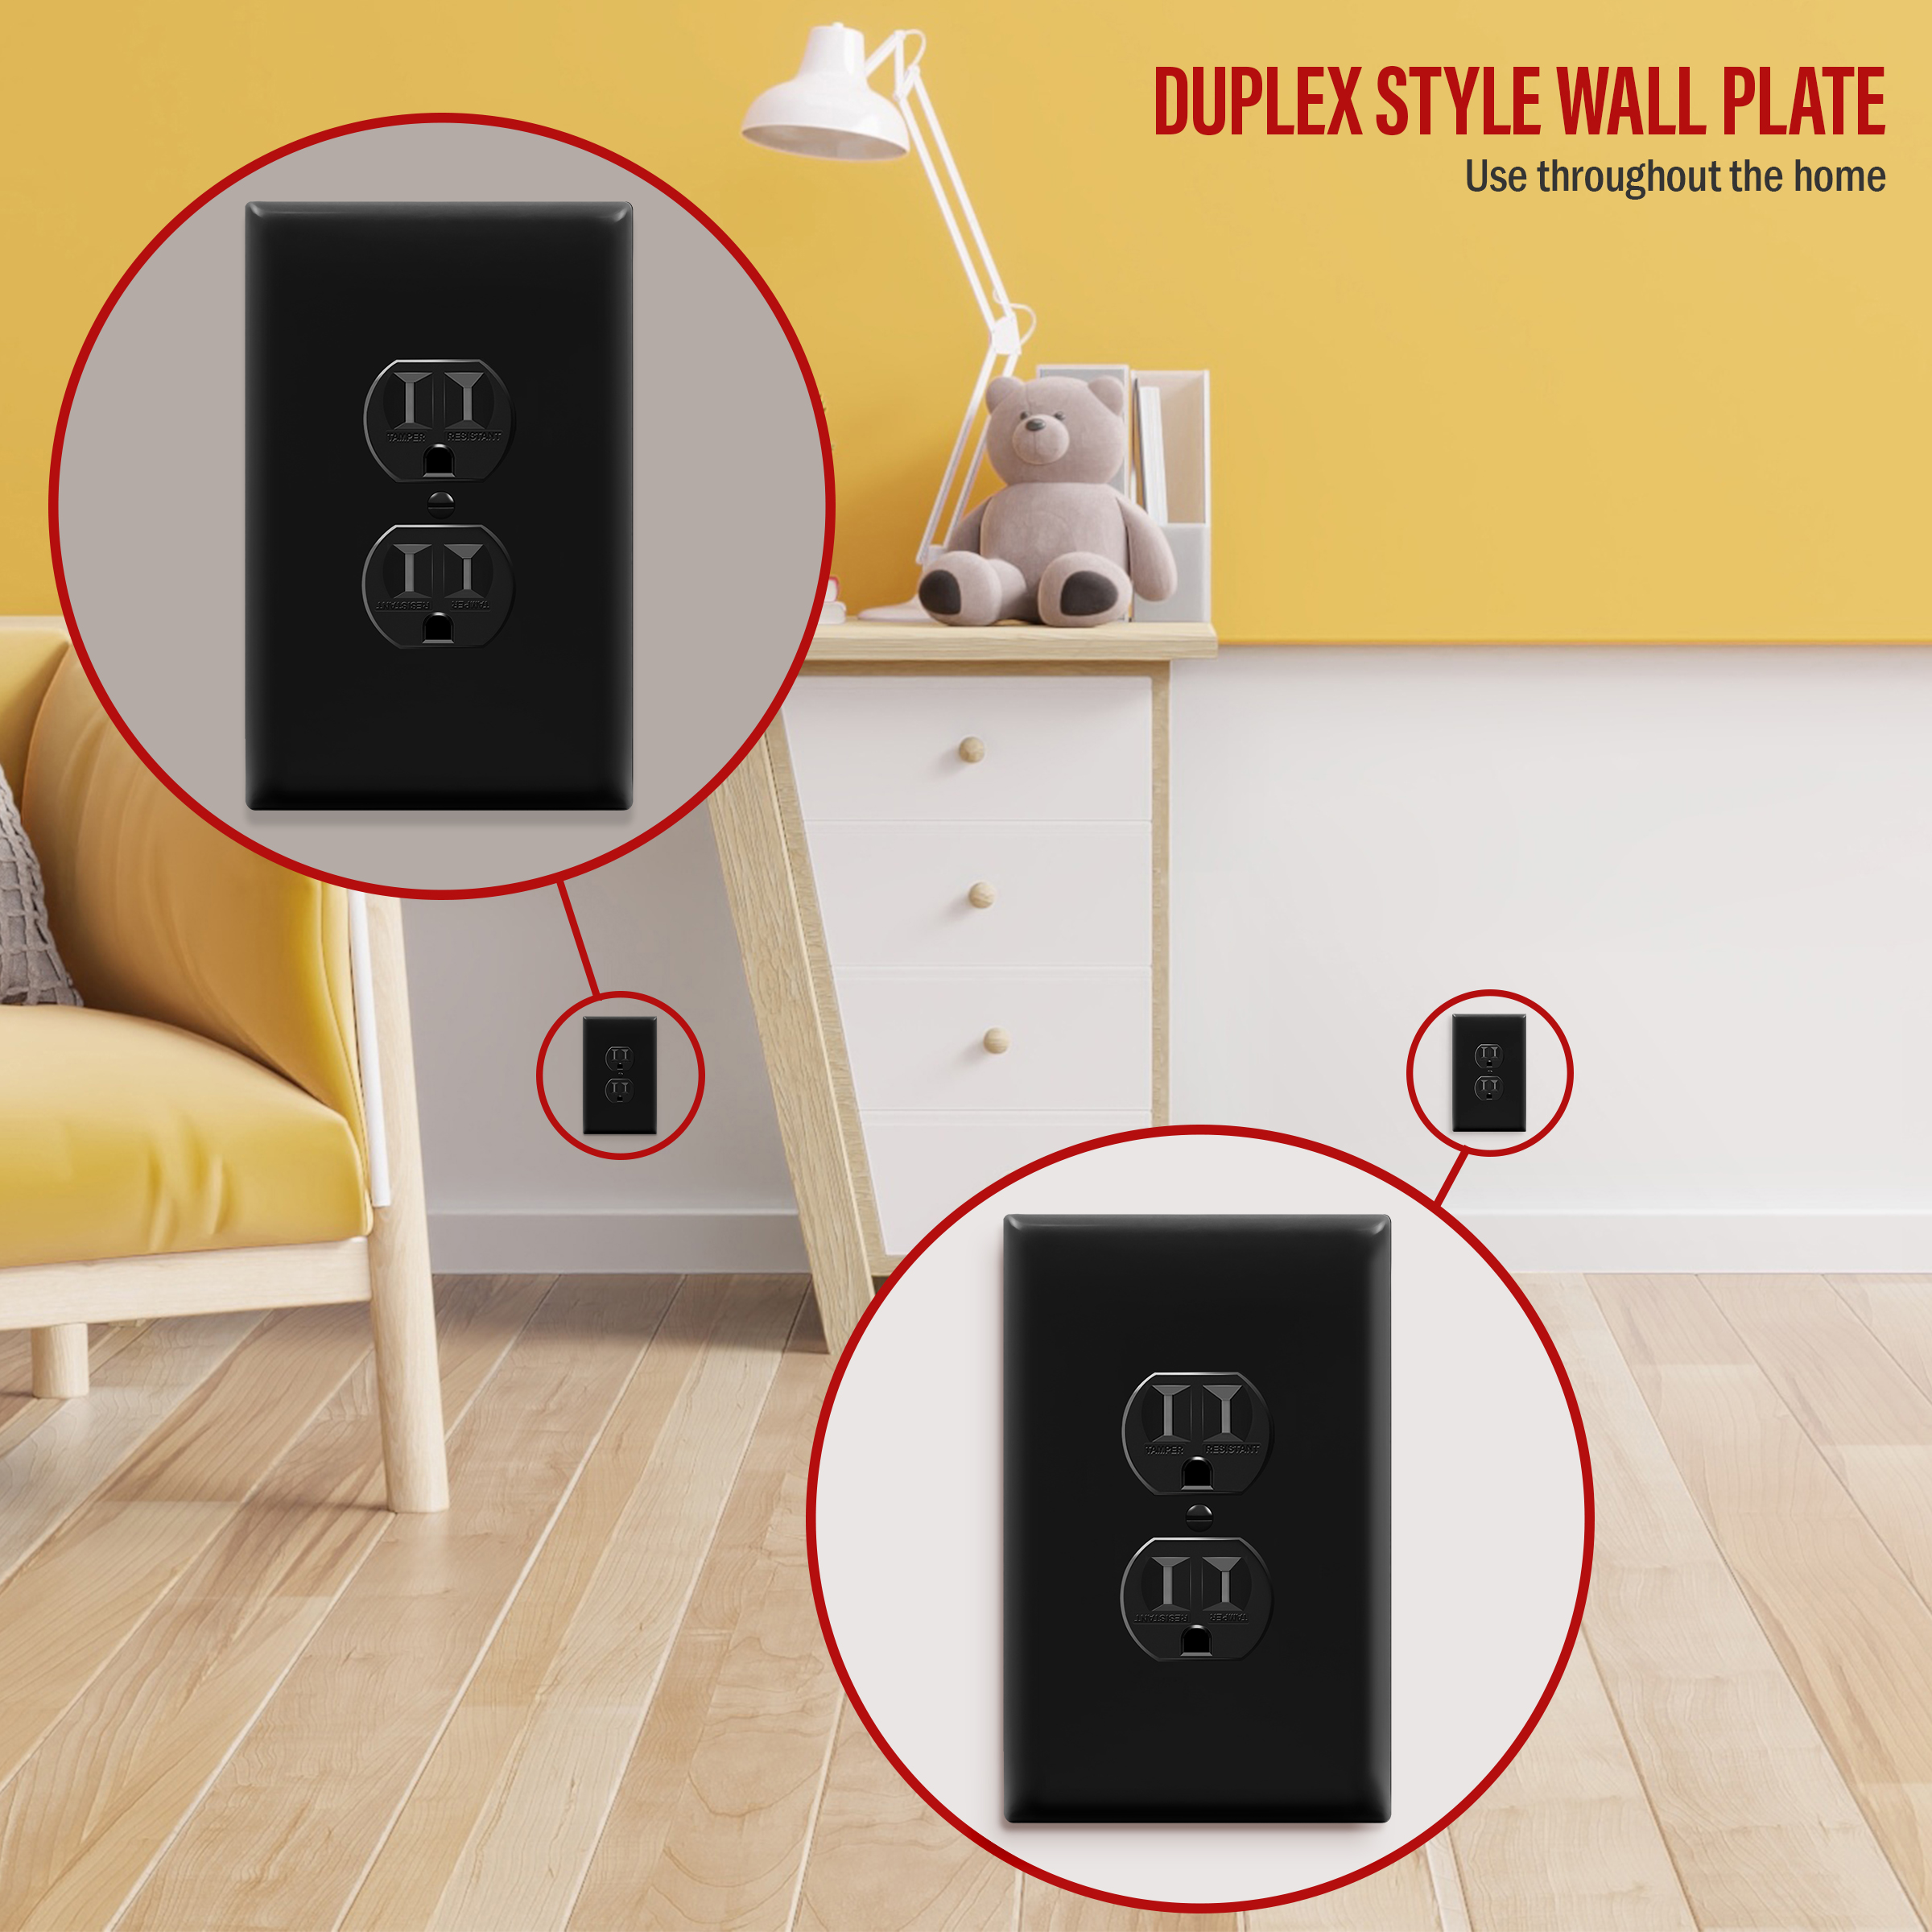 ENERLITES Duplex Receptacle Wall Plate, Jumbo Electrical Outlet Cover, Gloss Finish, Oversized 1-Gang, Polycarbonate Thermoplastic, Black - image 3 of 5